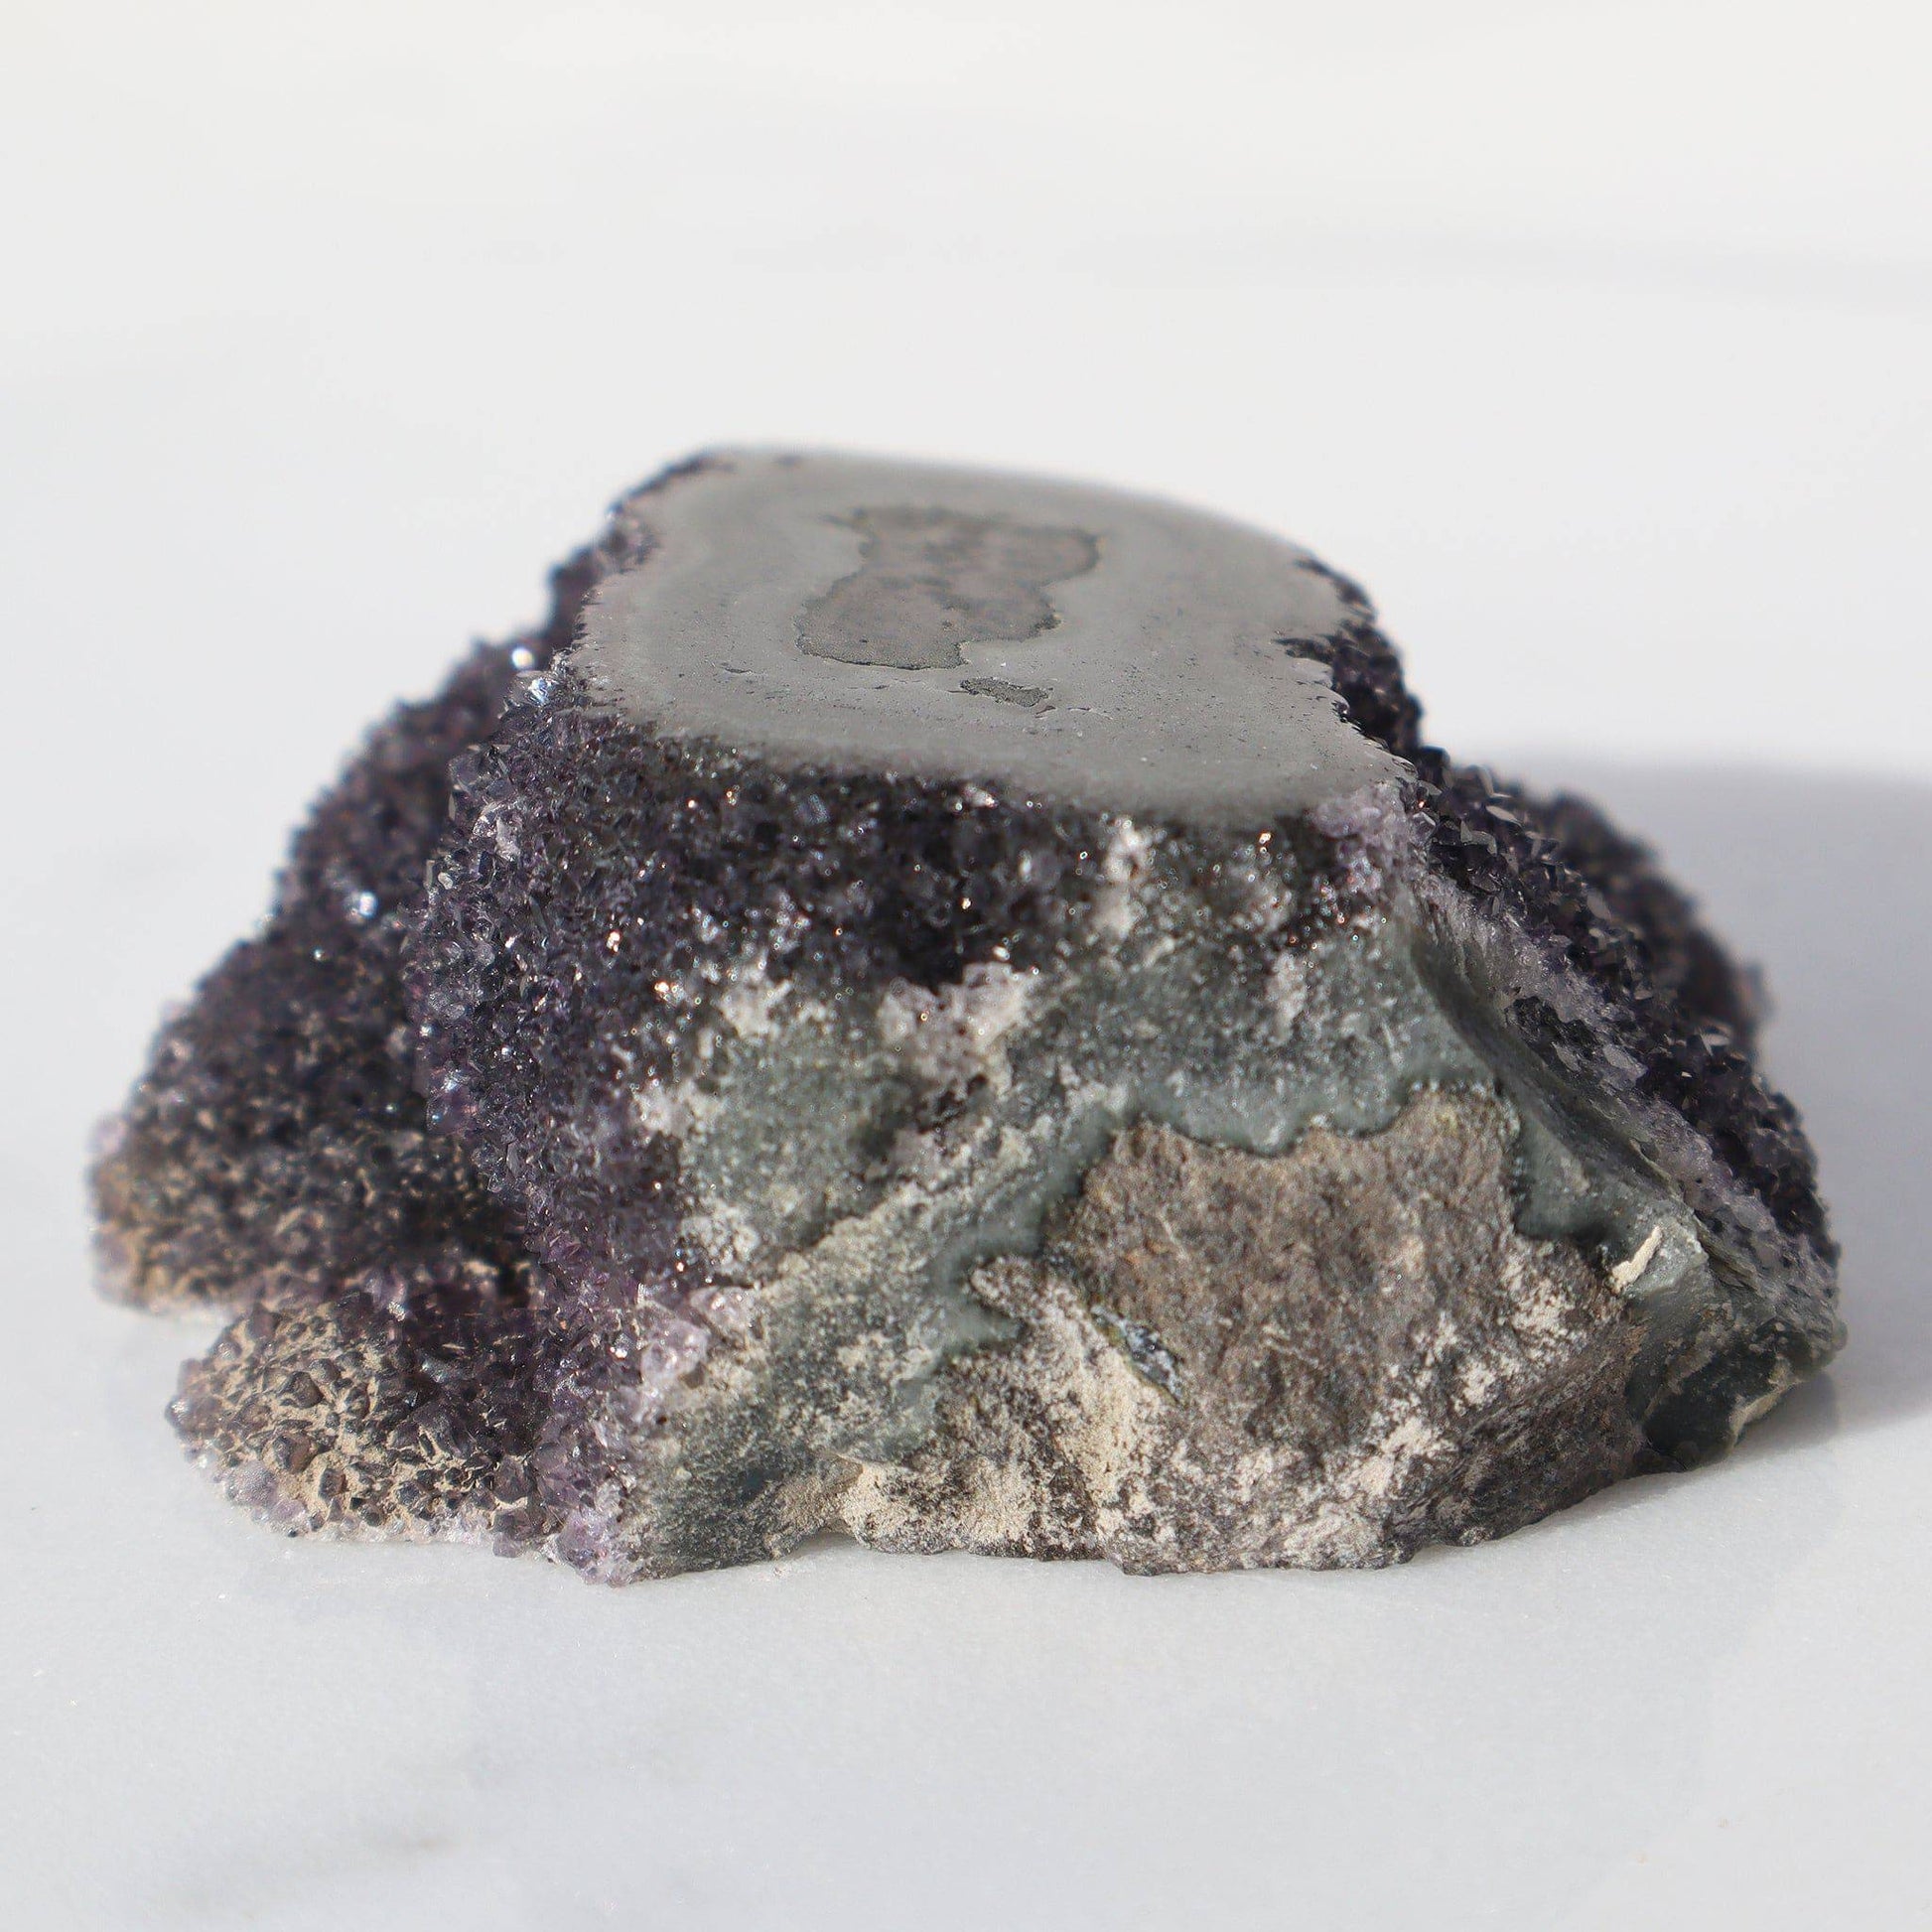 Small volcano-resembling cluster formation. Surrounded by charcoal-purple color micro crystals exposing a cut stalactite on its top. Visible green celadonite. Unpolished basalt for a very raw and primeval look. 